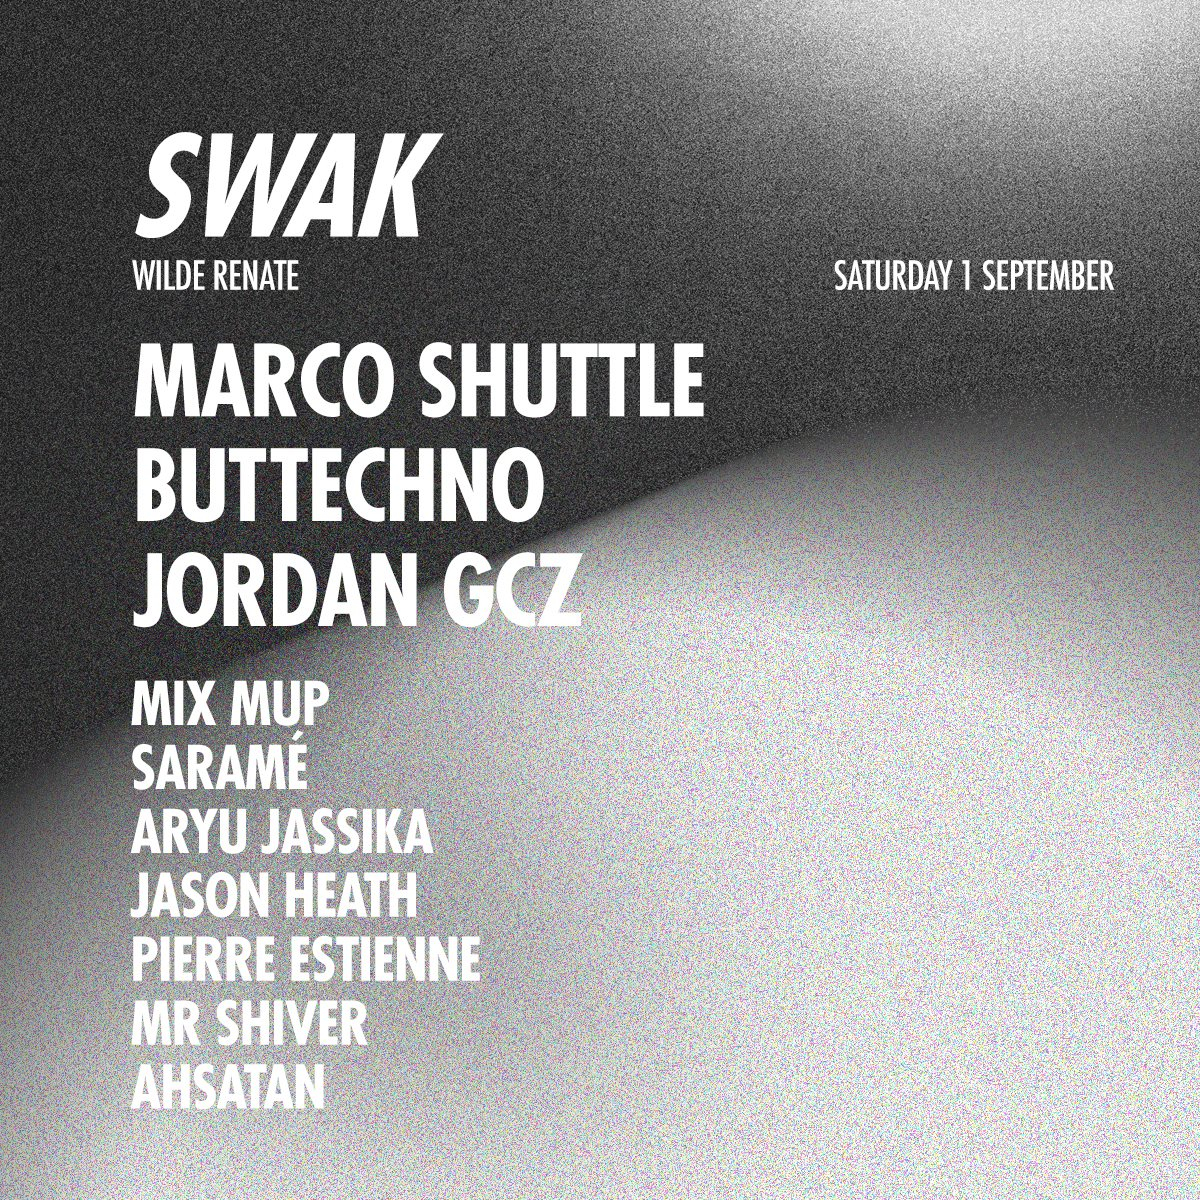 Swak with Marco Shuttle, Buttechno, Jordan GCZ & More - Flyer front